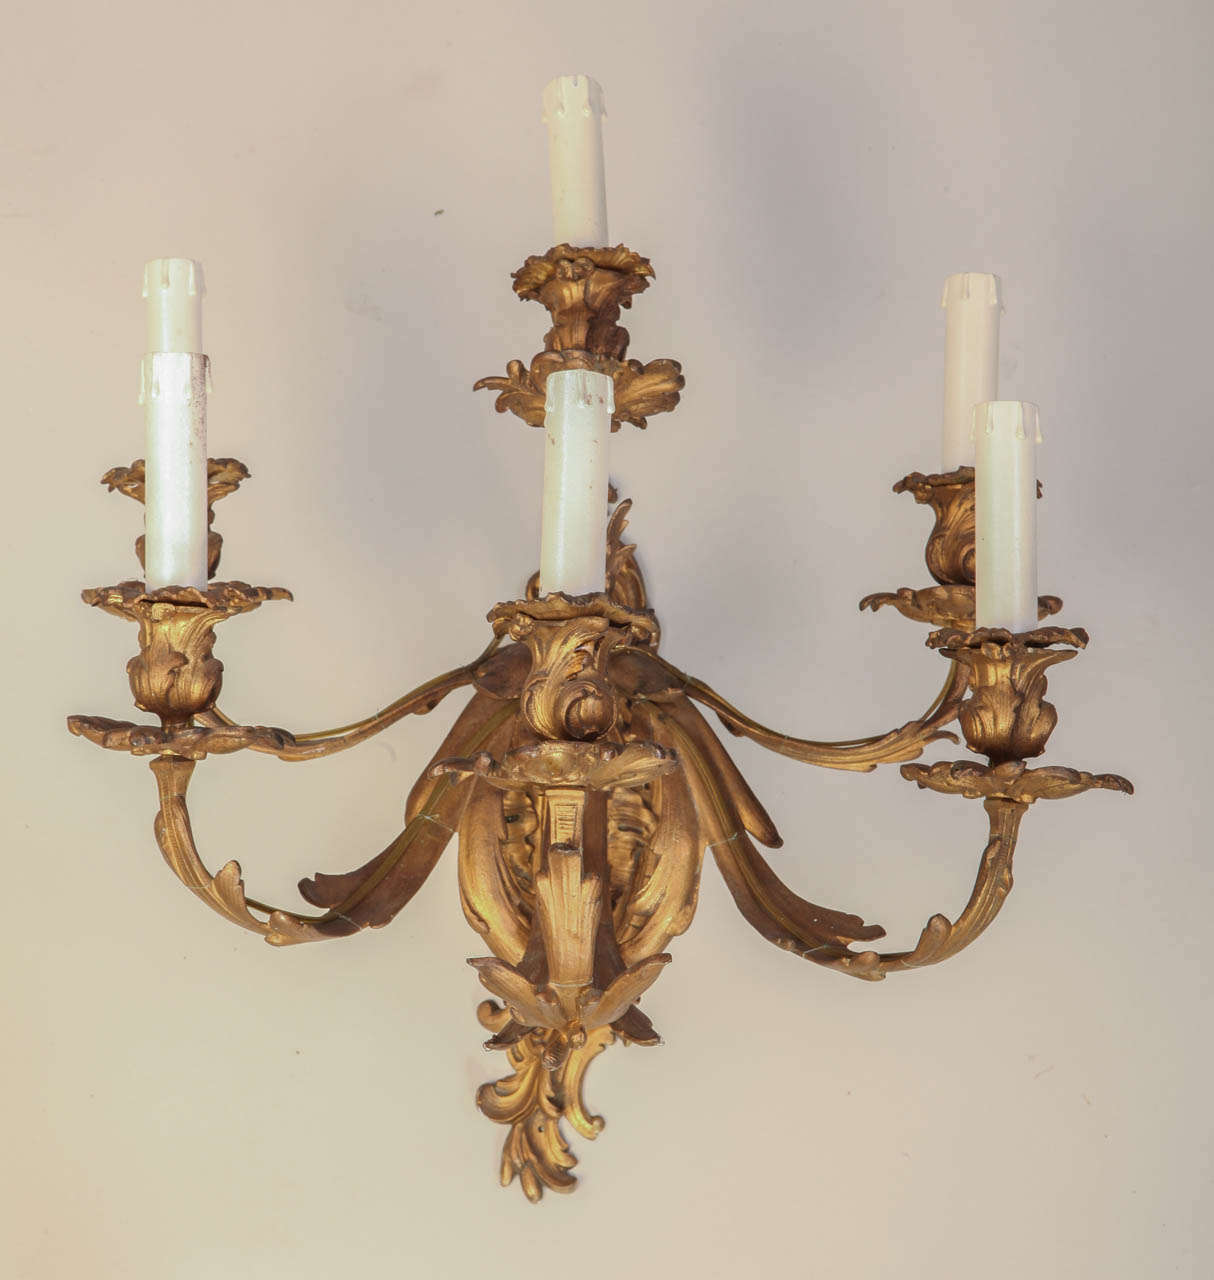 A pair of French mid-19th century Louis XV style ormolu six-arm sconces.
Measures: cm 50 x 47 x 50.